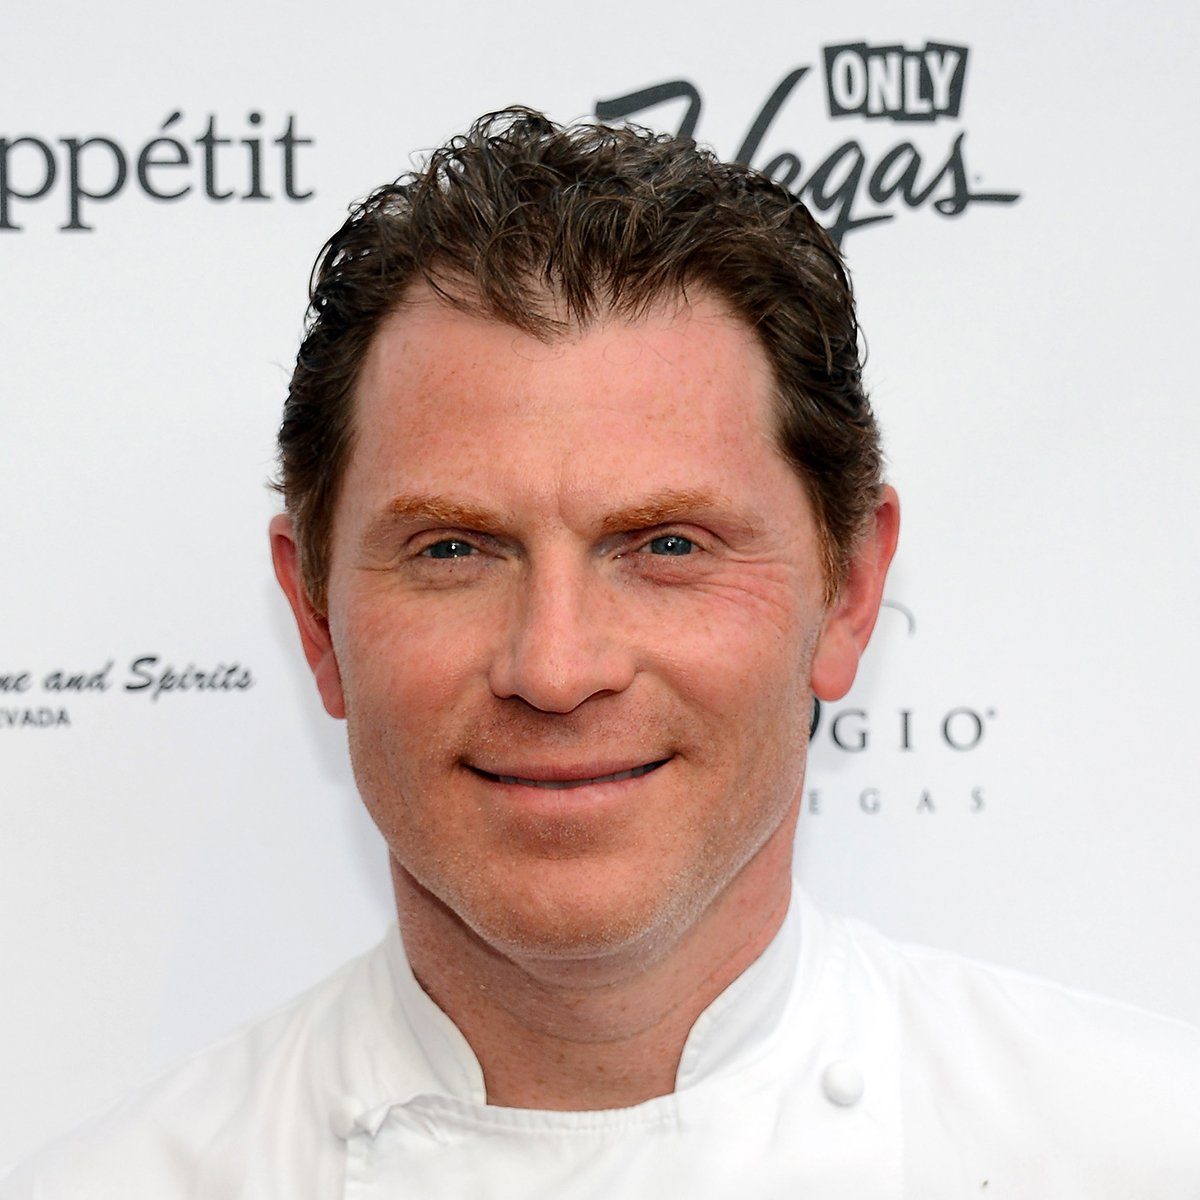 LAS VEGAS, NV - MAY 10: Television personality and chef Bobby Flay arrives at Vegas Uncork'd by Bon Appetit's Grand Tasting event at Caesars Palace on May 10, 2013 in Las Vegas, Nevada. (Photo by Ethan Miller/Getty Images for Vegas Uncork'd by Bon Appetit)